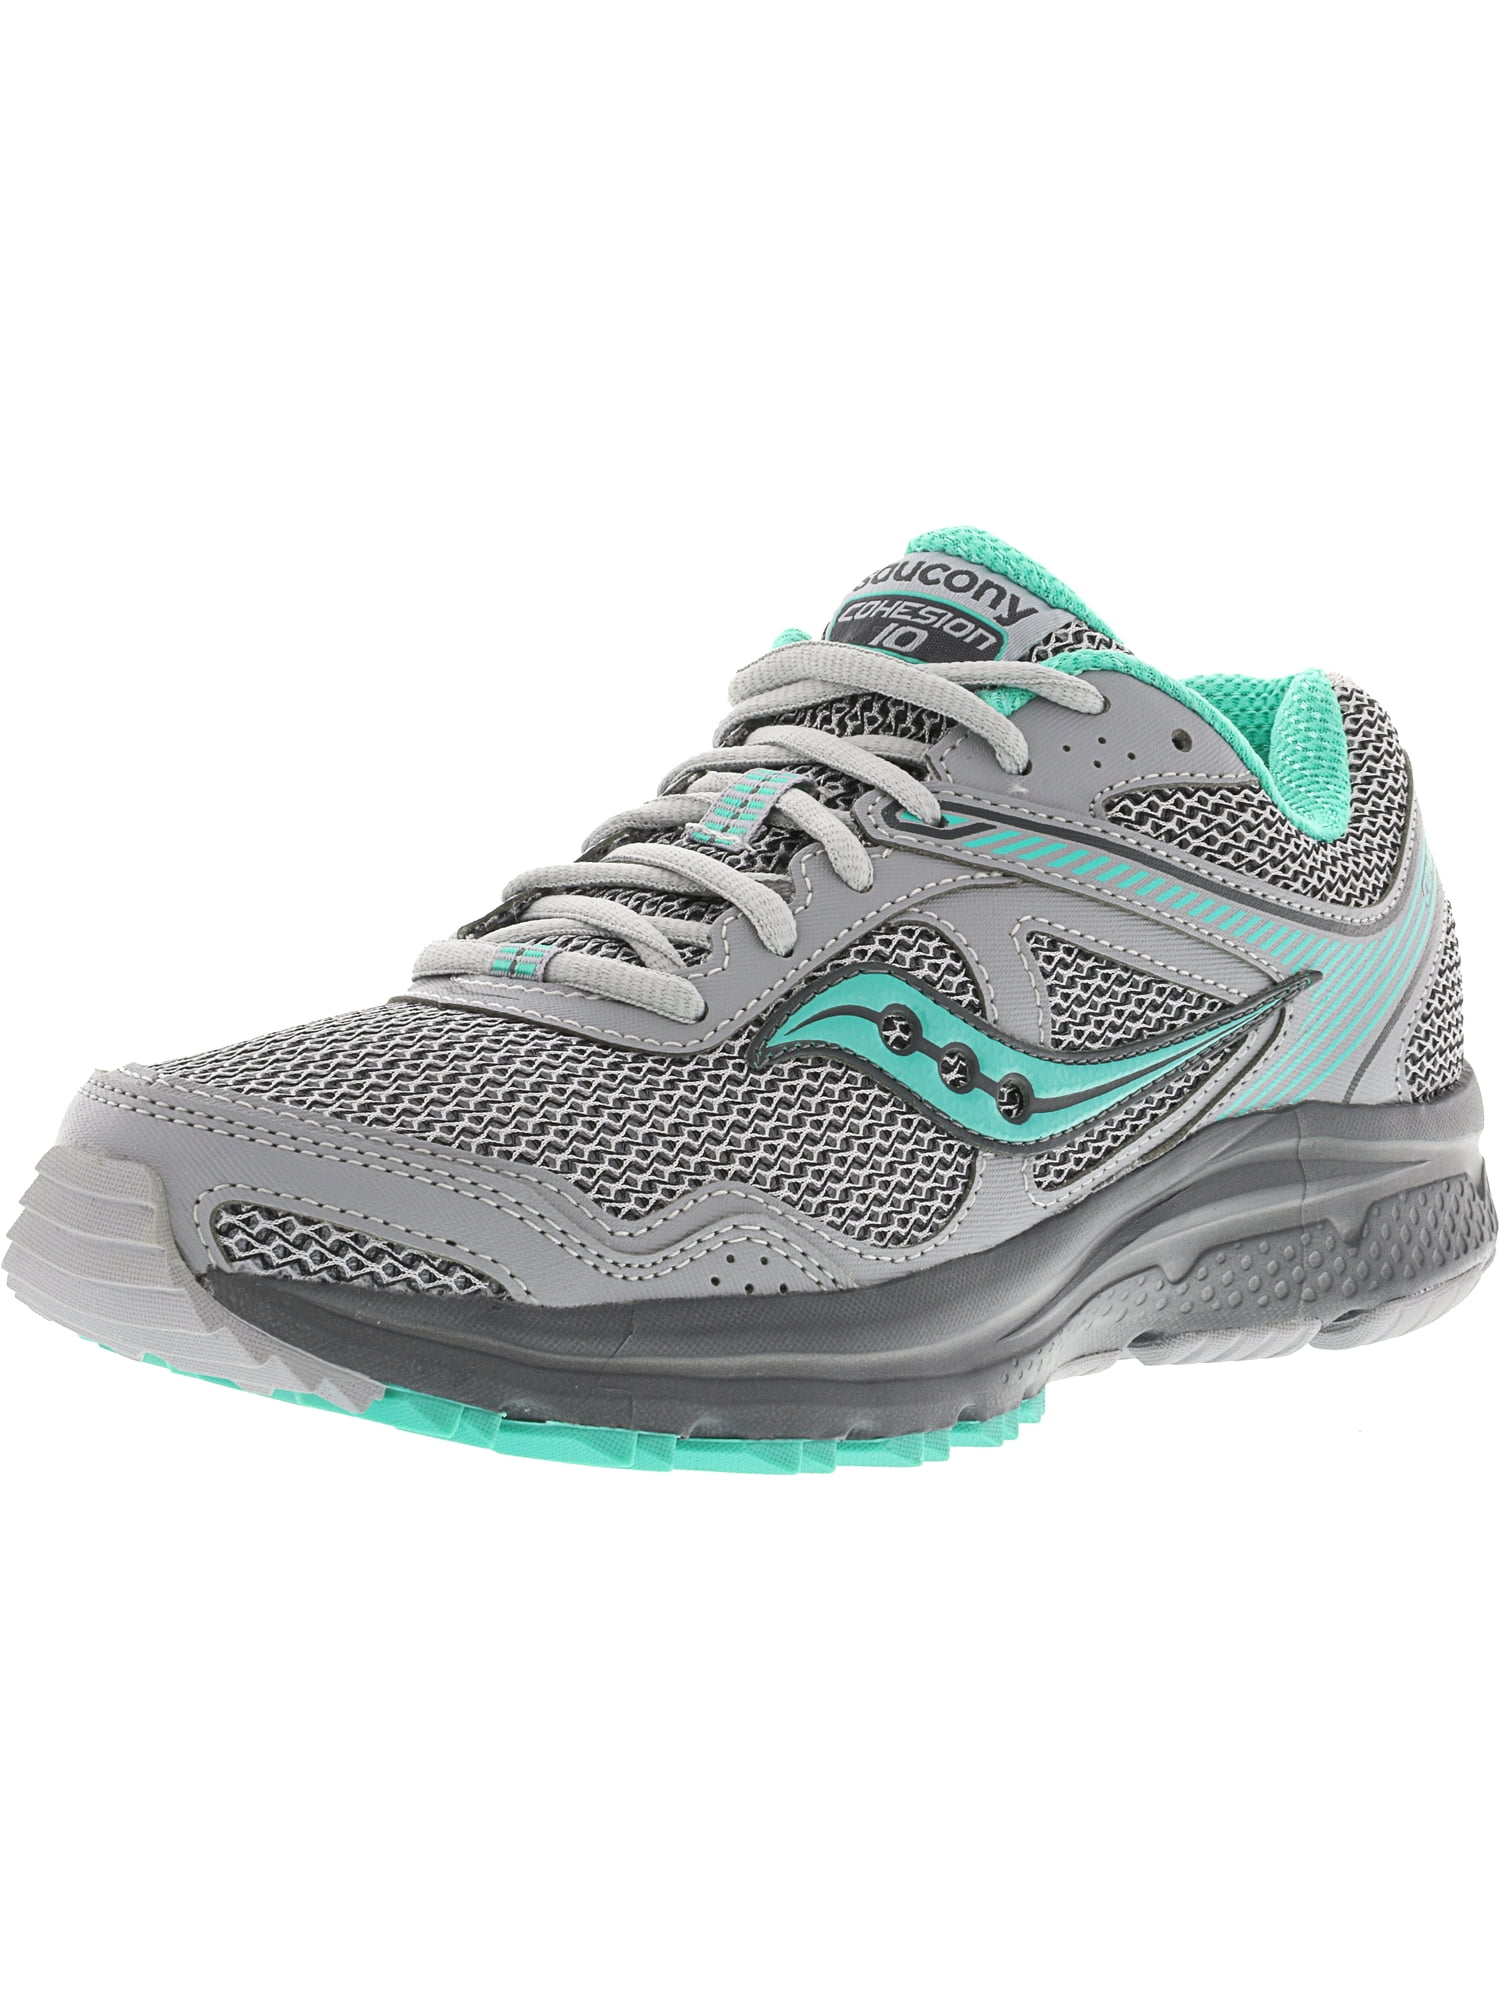 Grey / Mint Ankle-High Running Shoe 